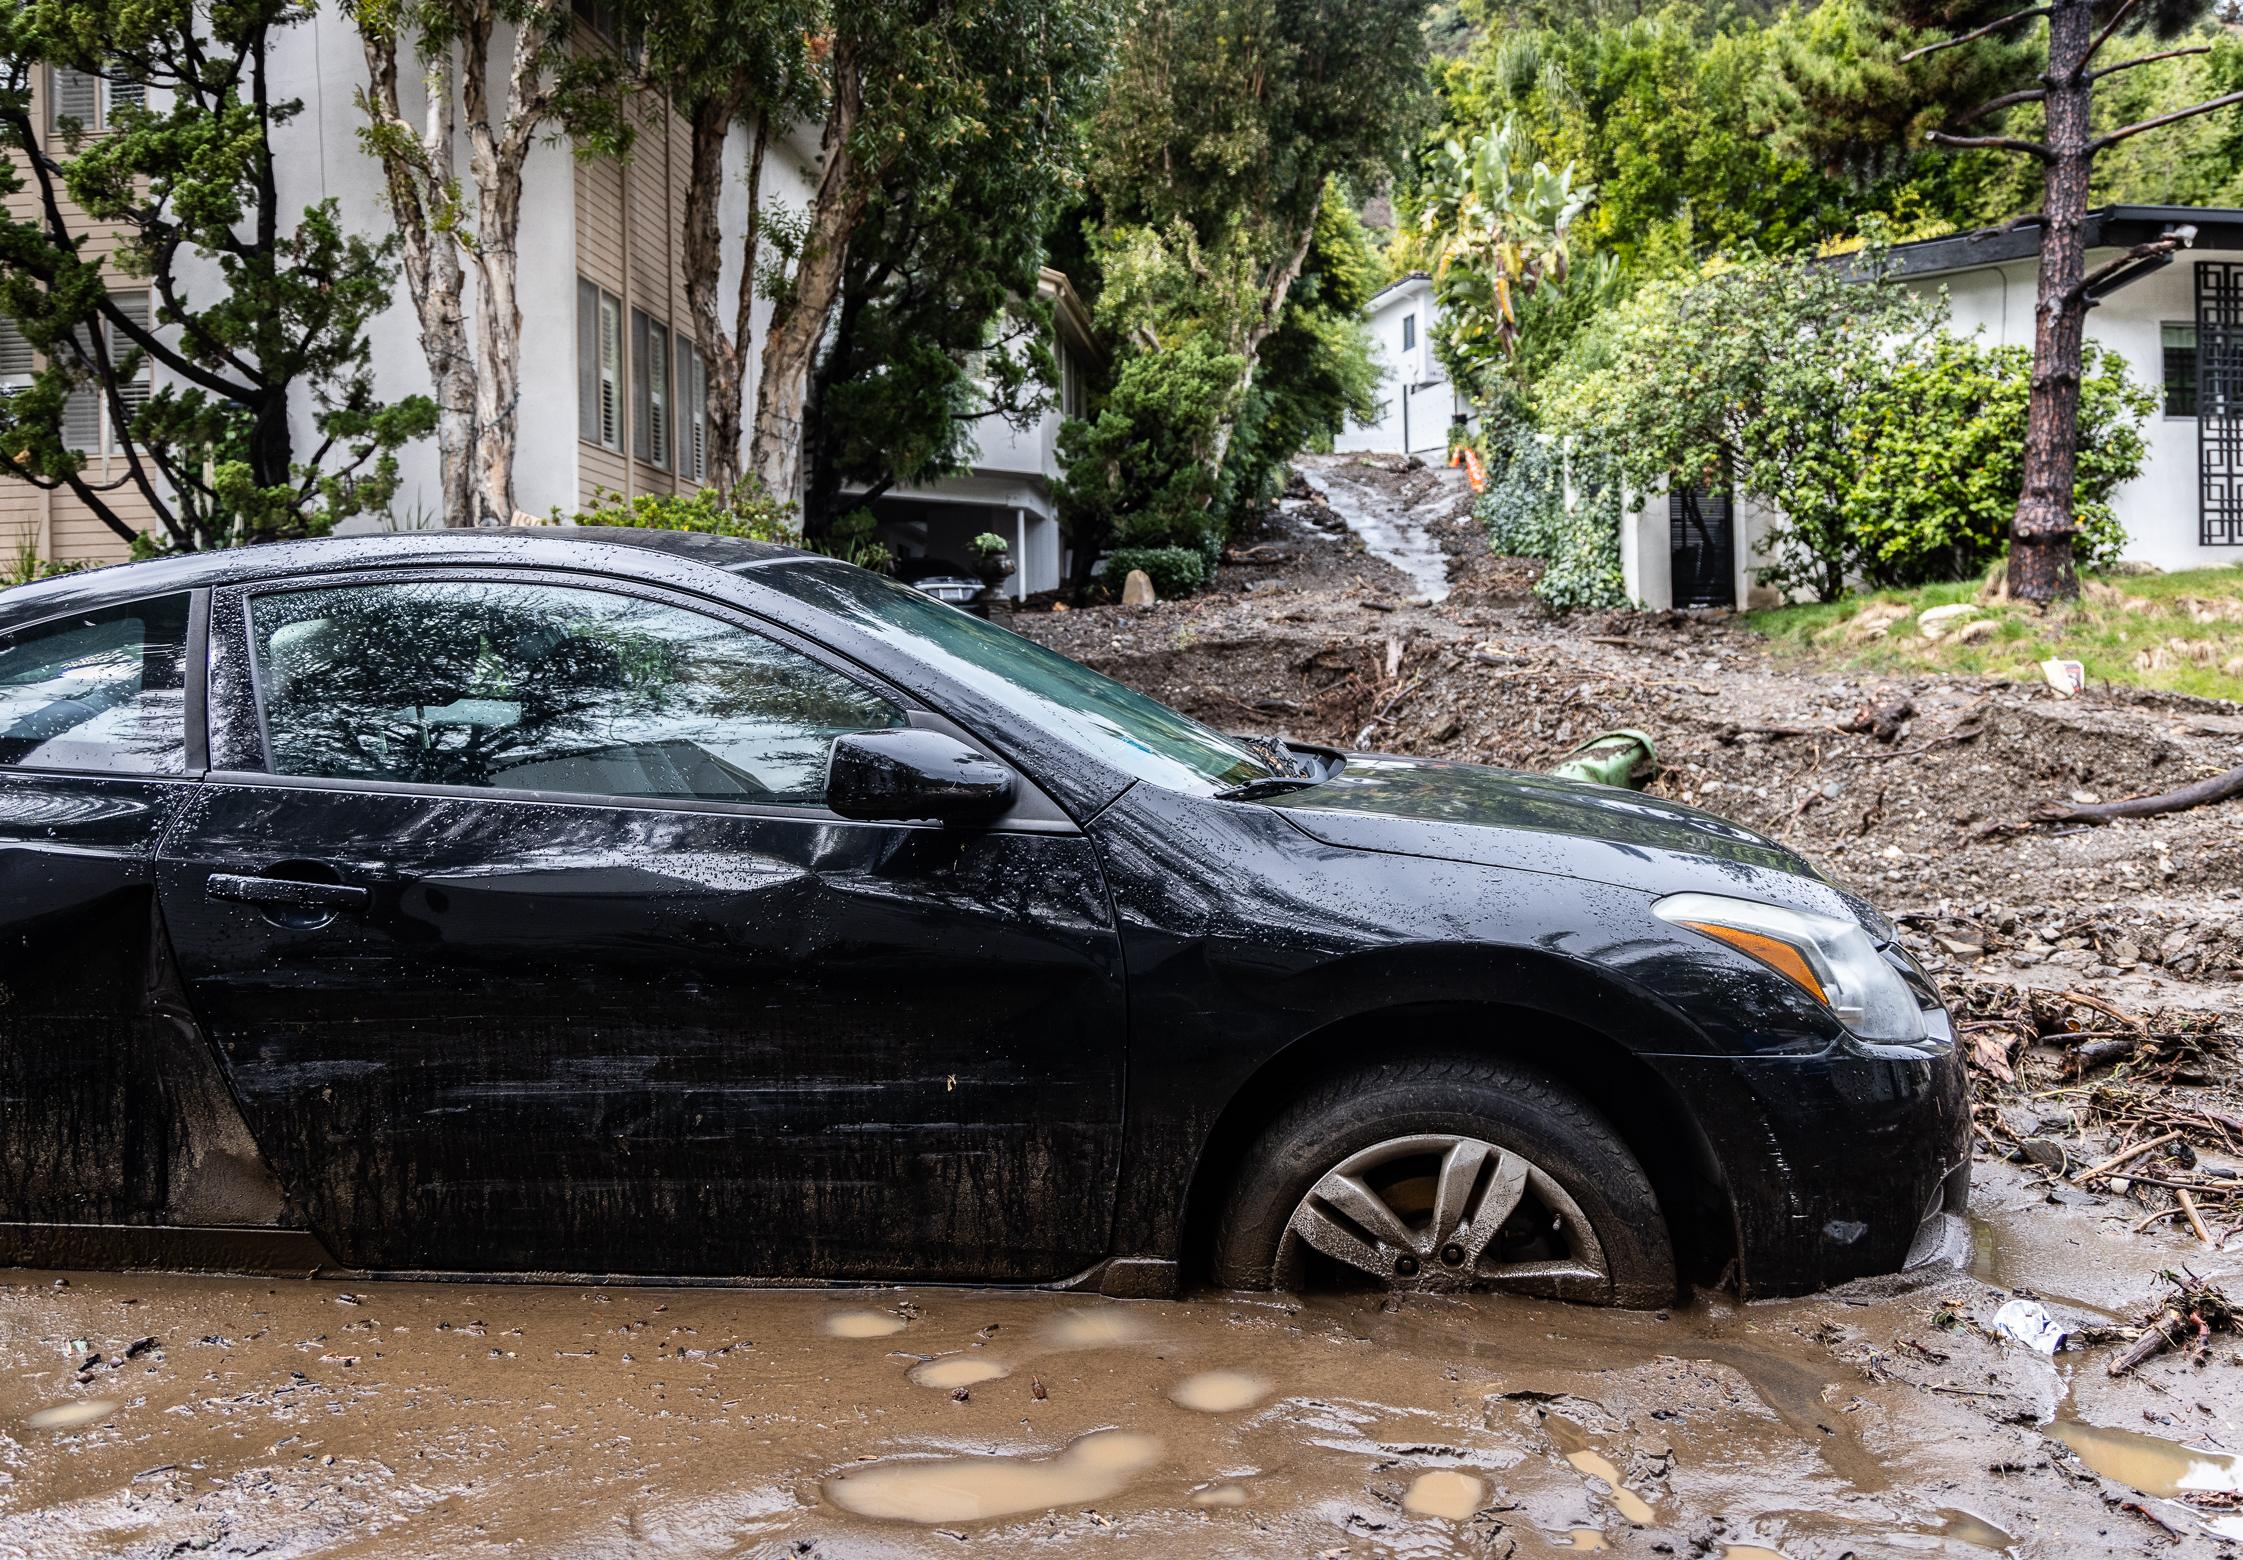 California’s Storm Damage Total Could Hit $11 Billion as Mudslide Tally Mounts